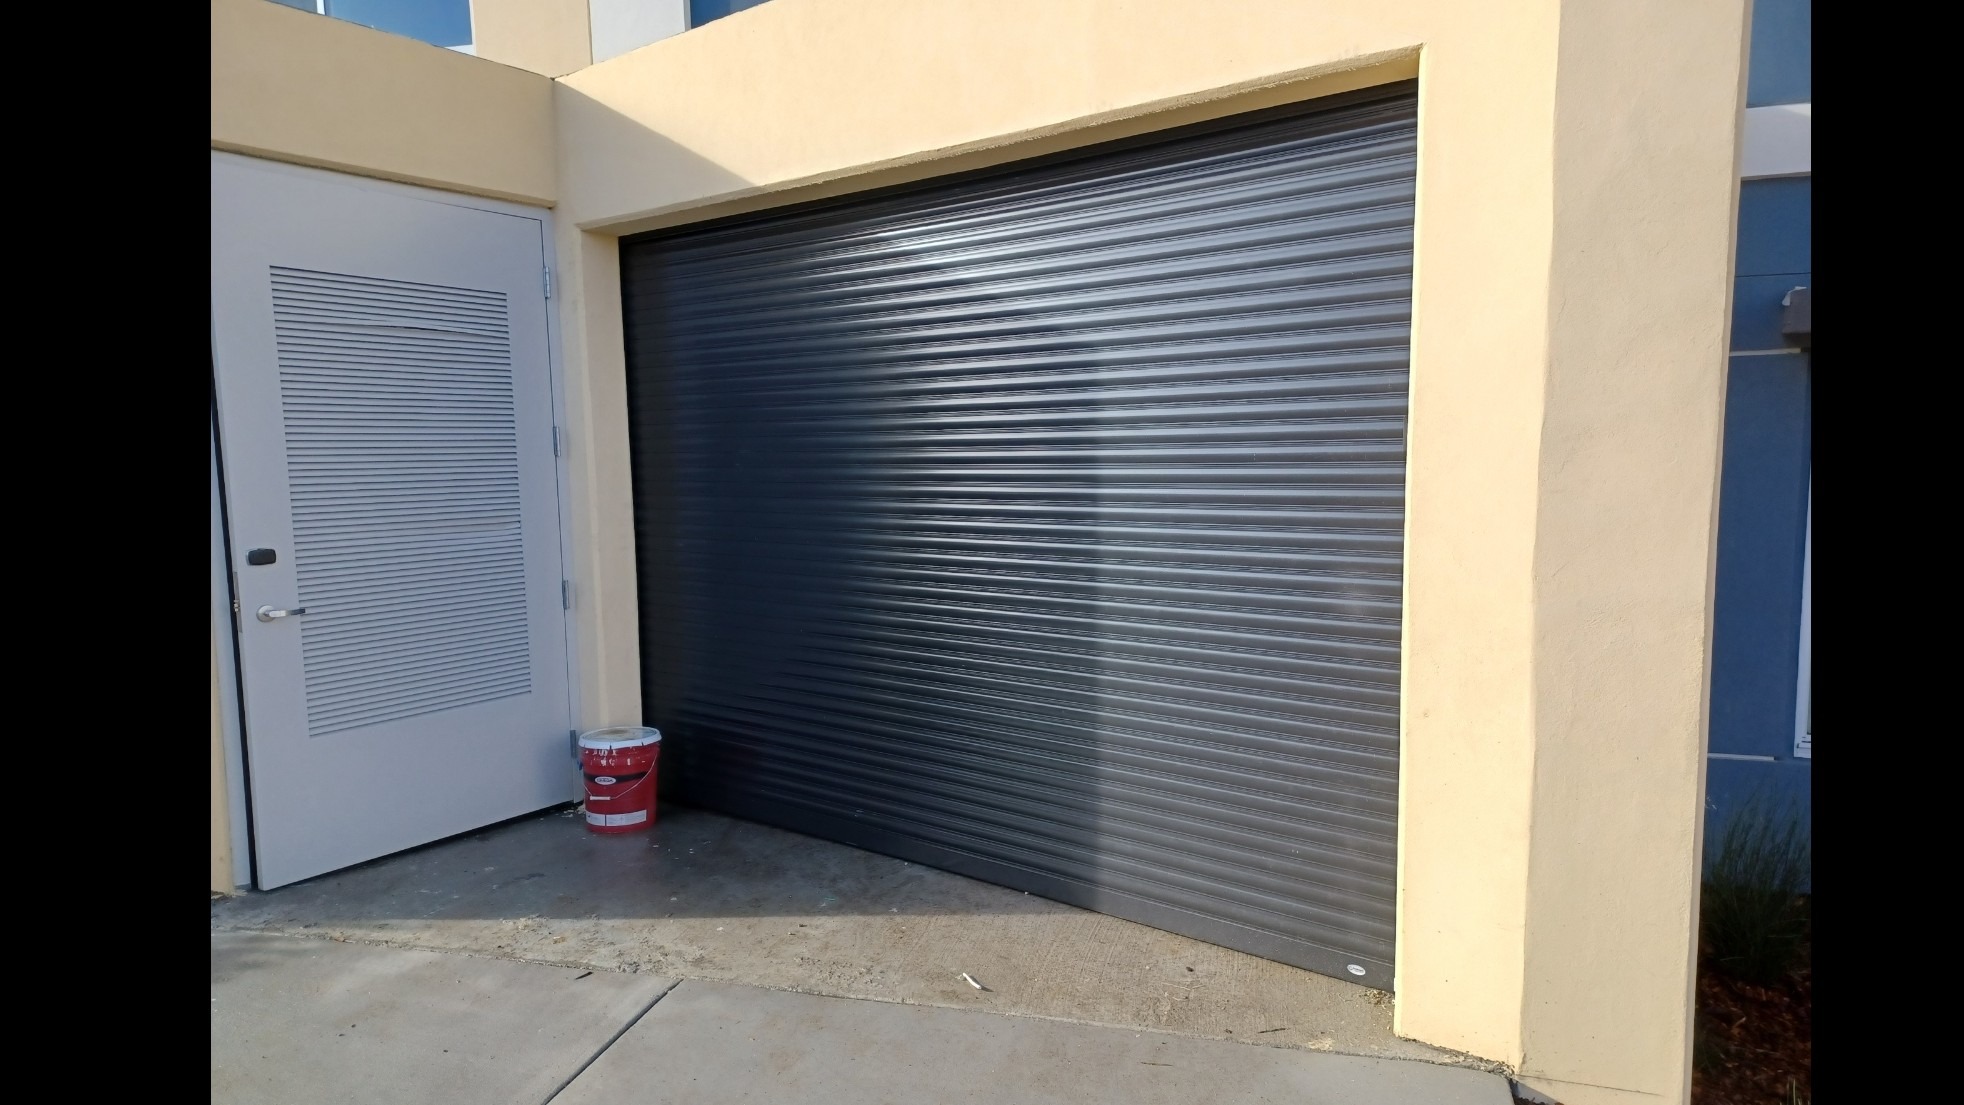 Trusted Cameron Park Garage Door Contractor Offers The Latest Commercial Systems